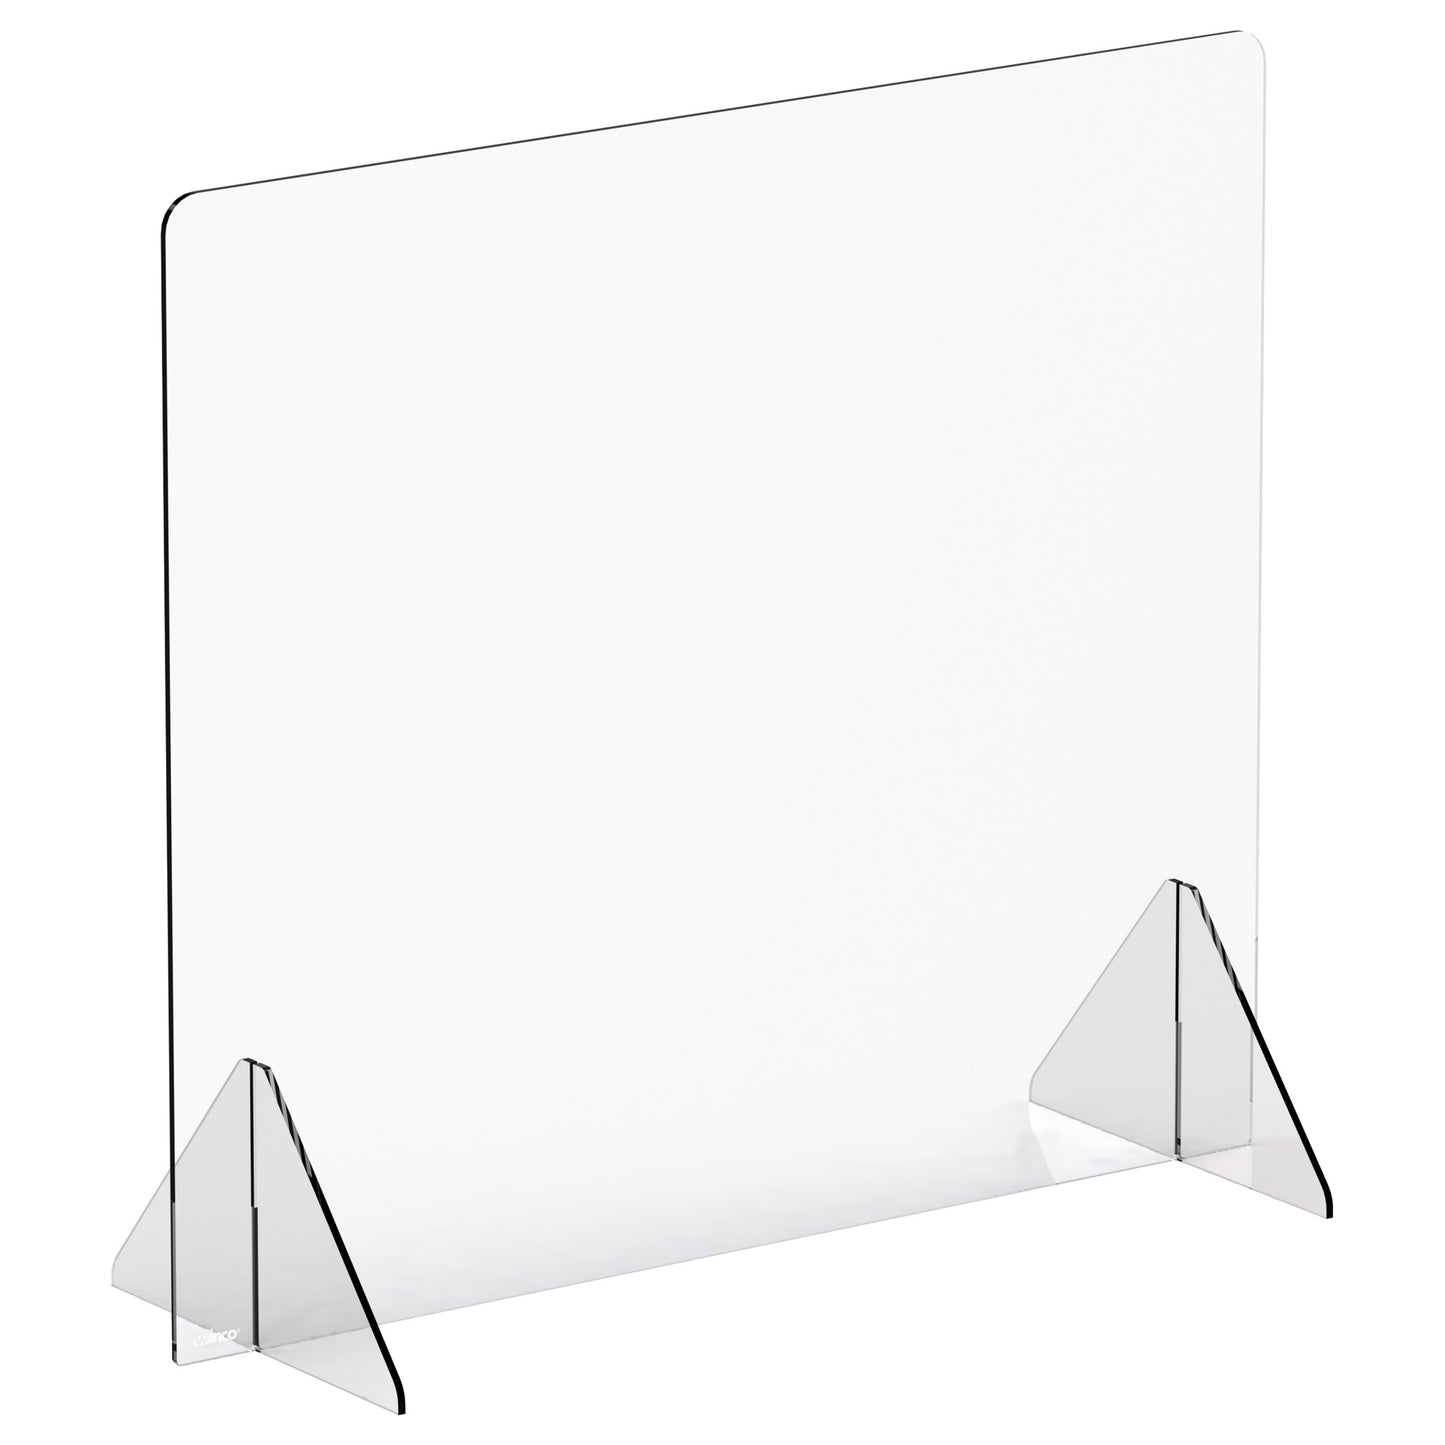 ACSS-3632 - Countertop Safety Shield - 36W